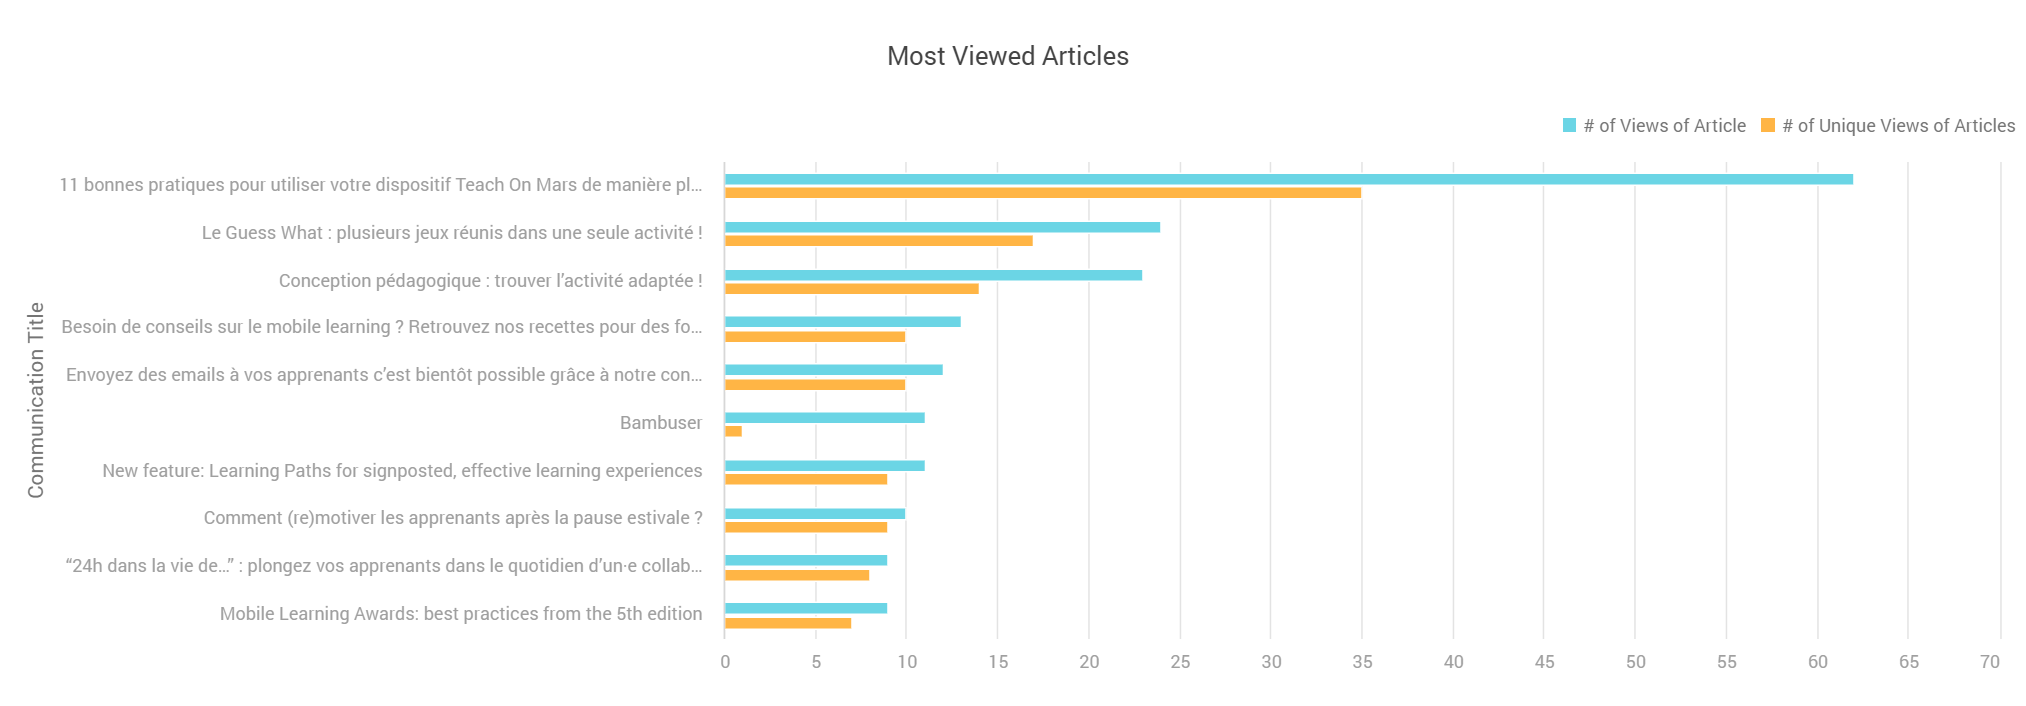 Most viewed articles.png